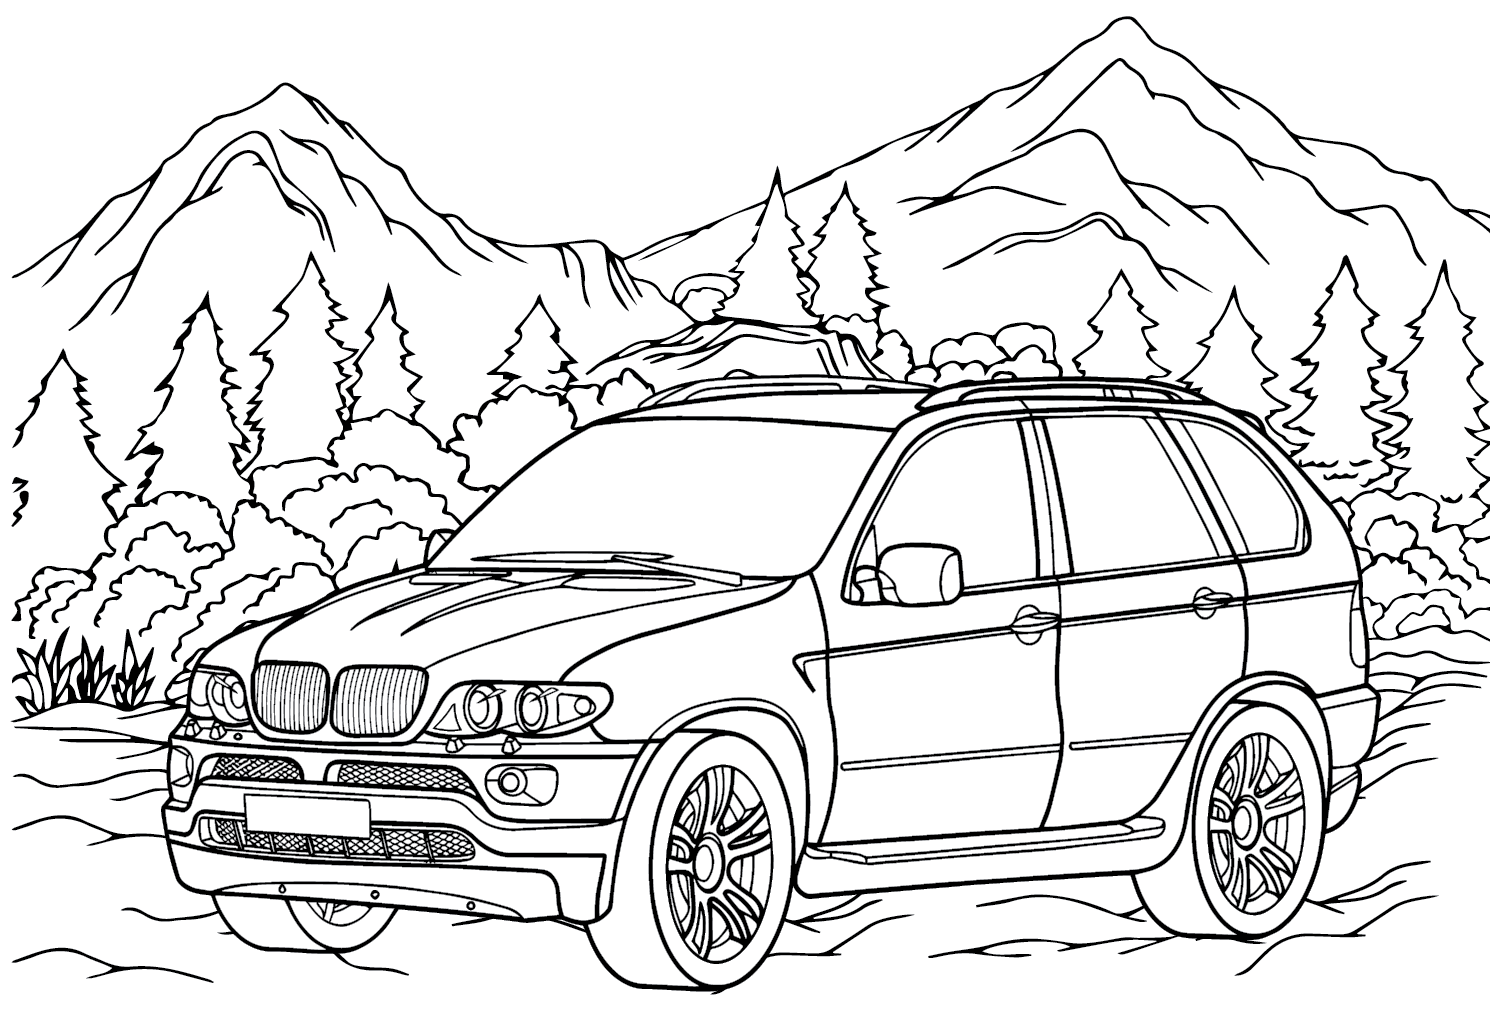 BMW X5 Coloring Page from BMW